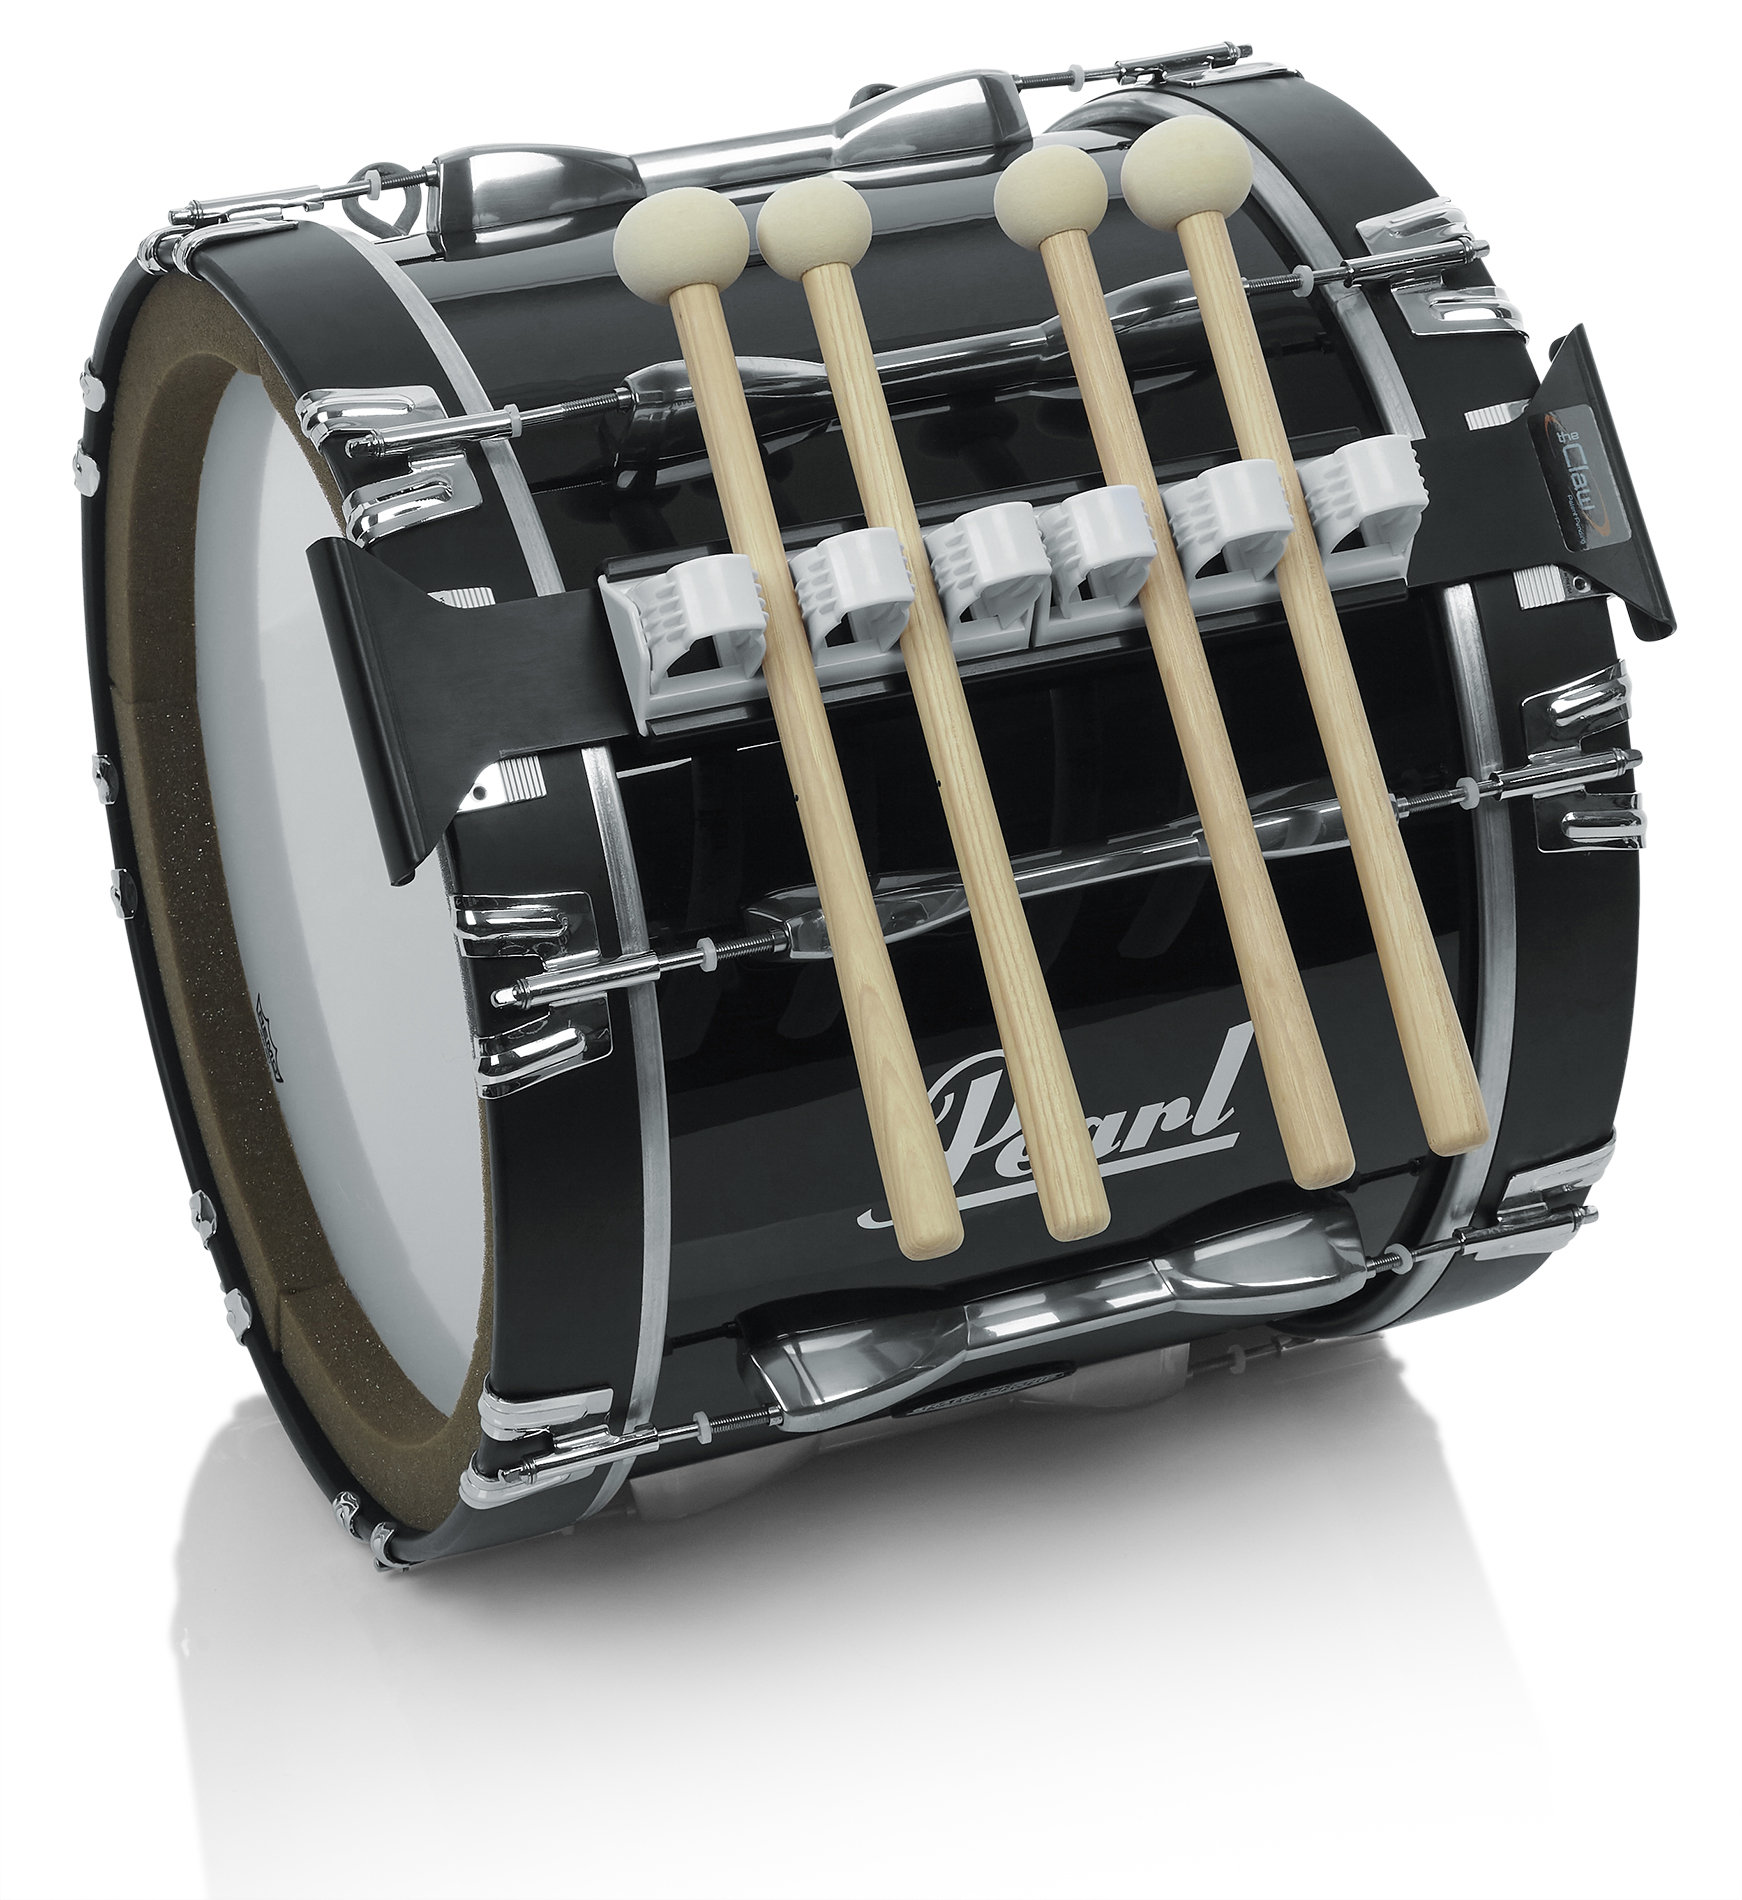 Percussion Plus C Series bass drum claw